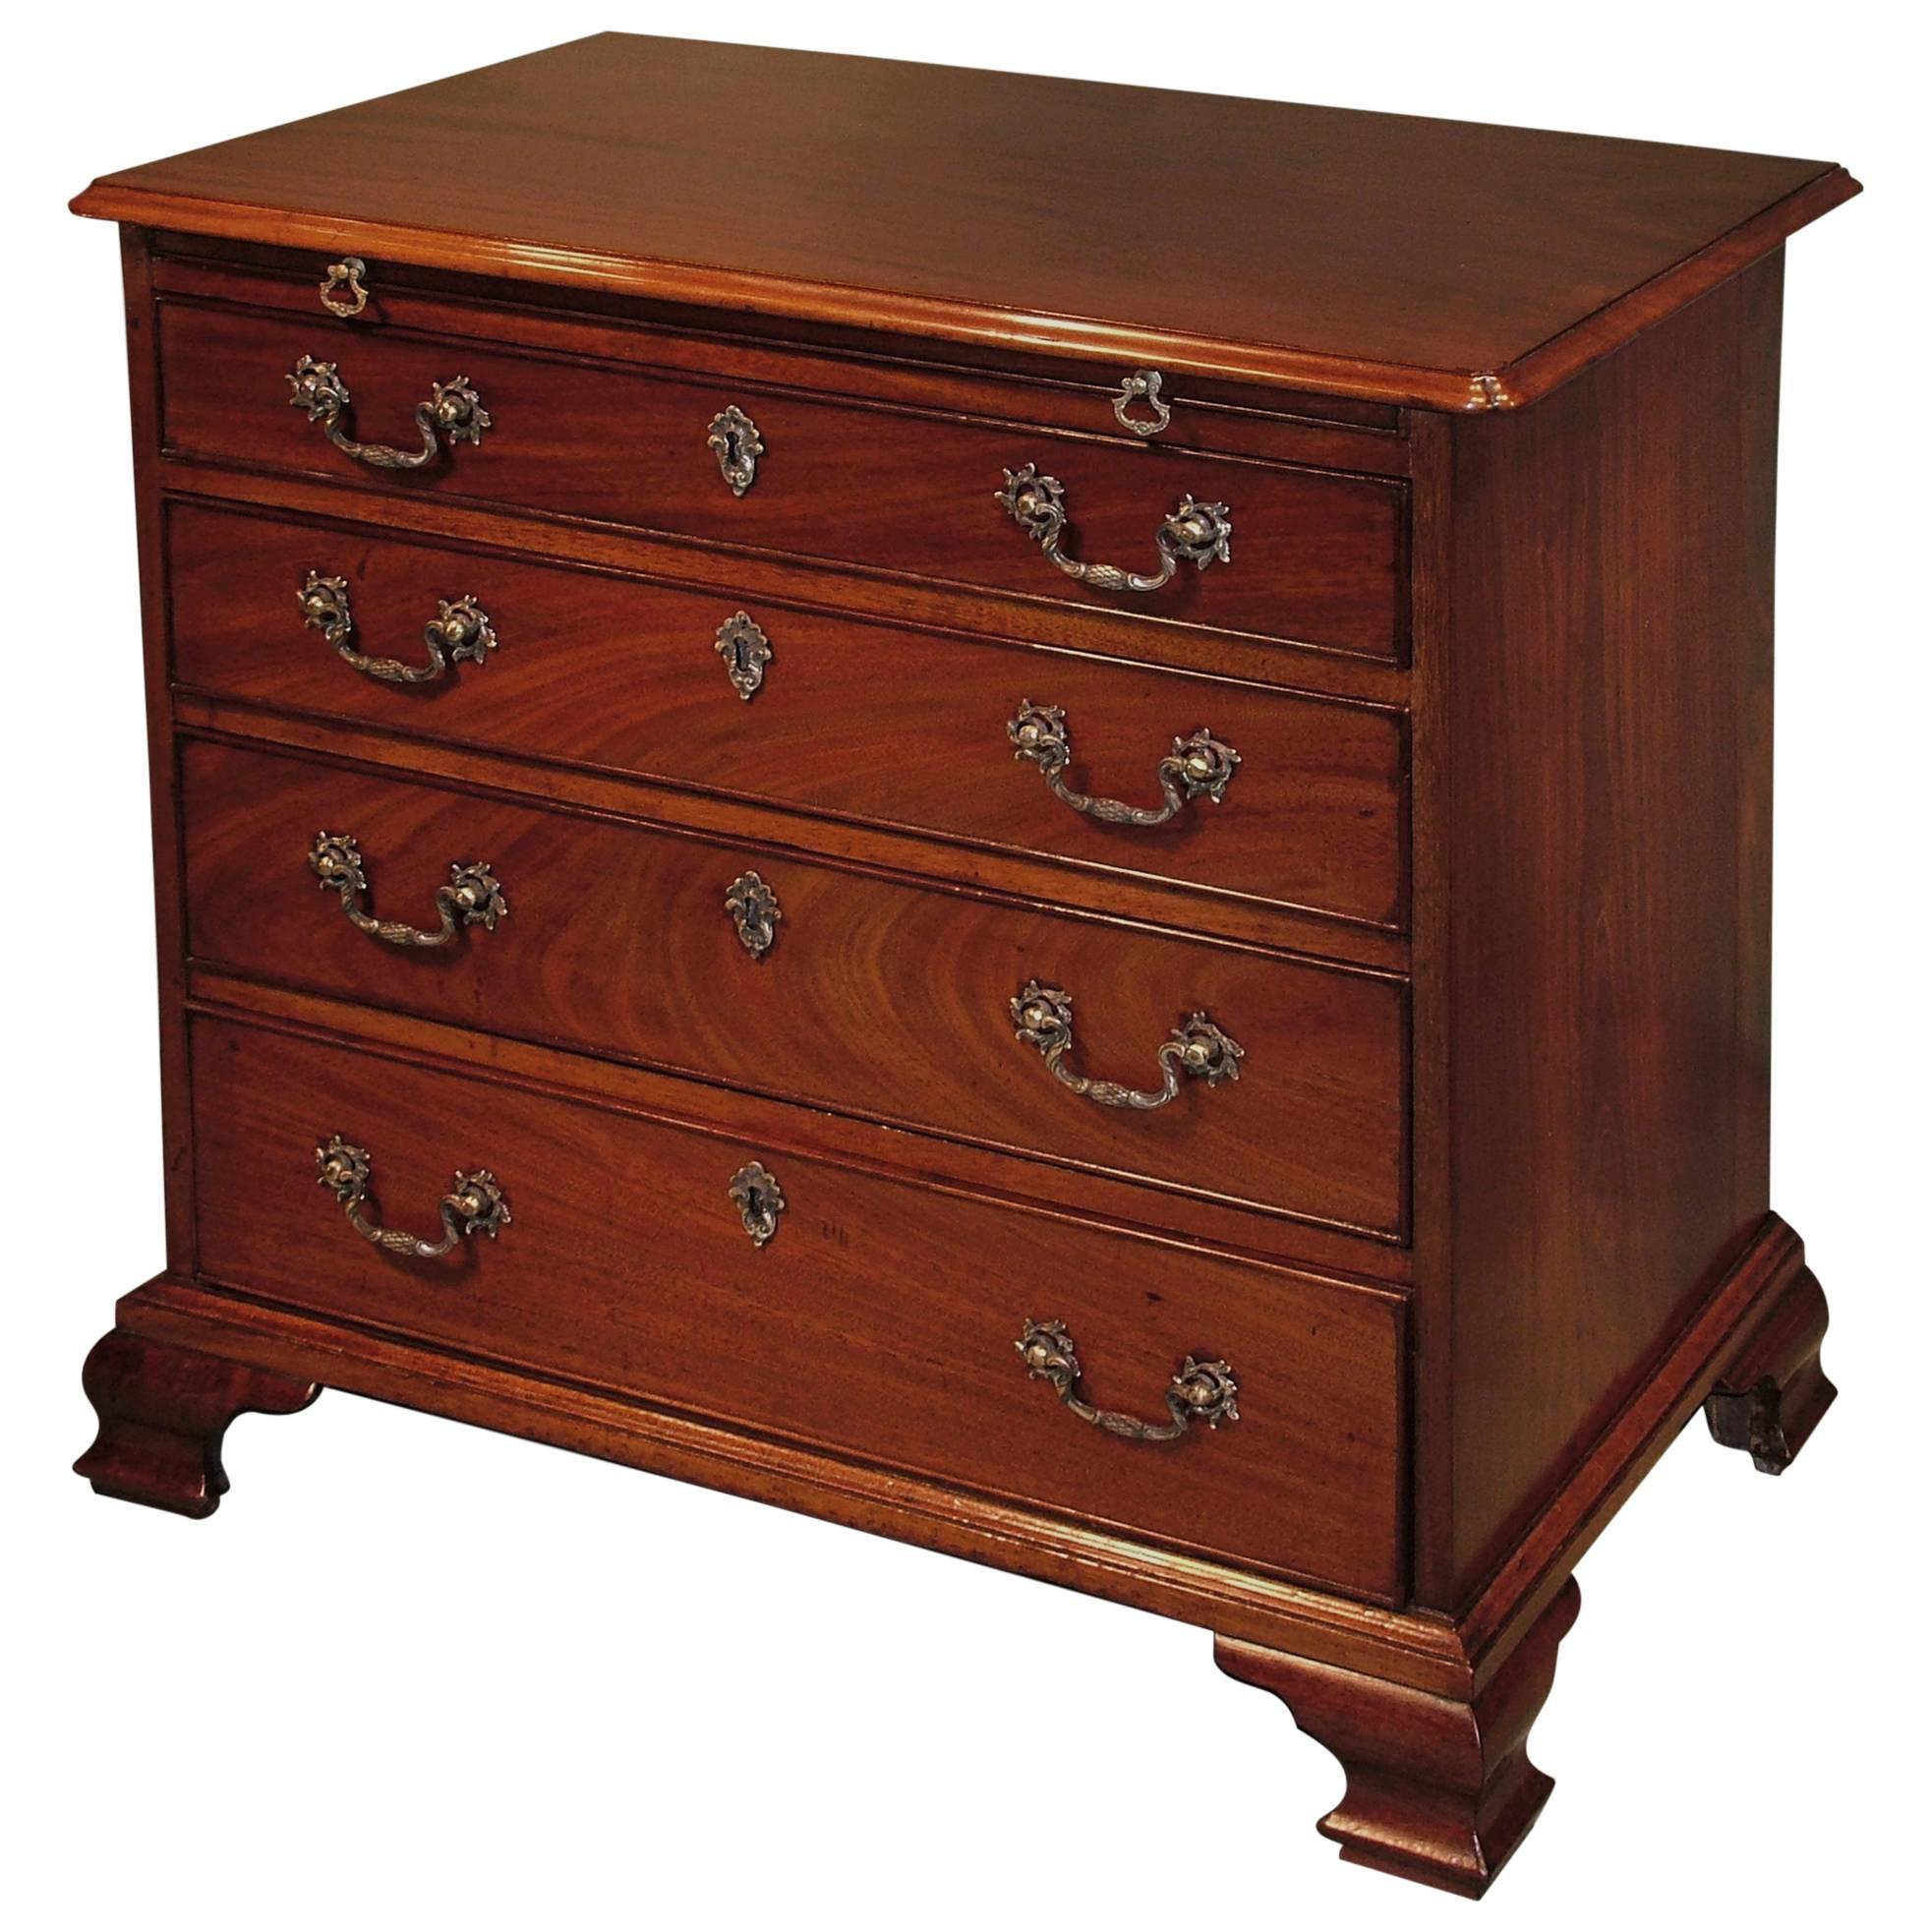 Mid-18th Century Small Mahogany Chest of Drawers